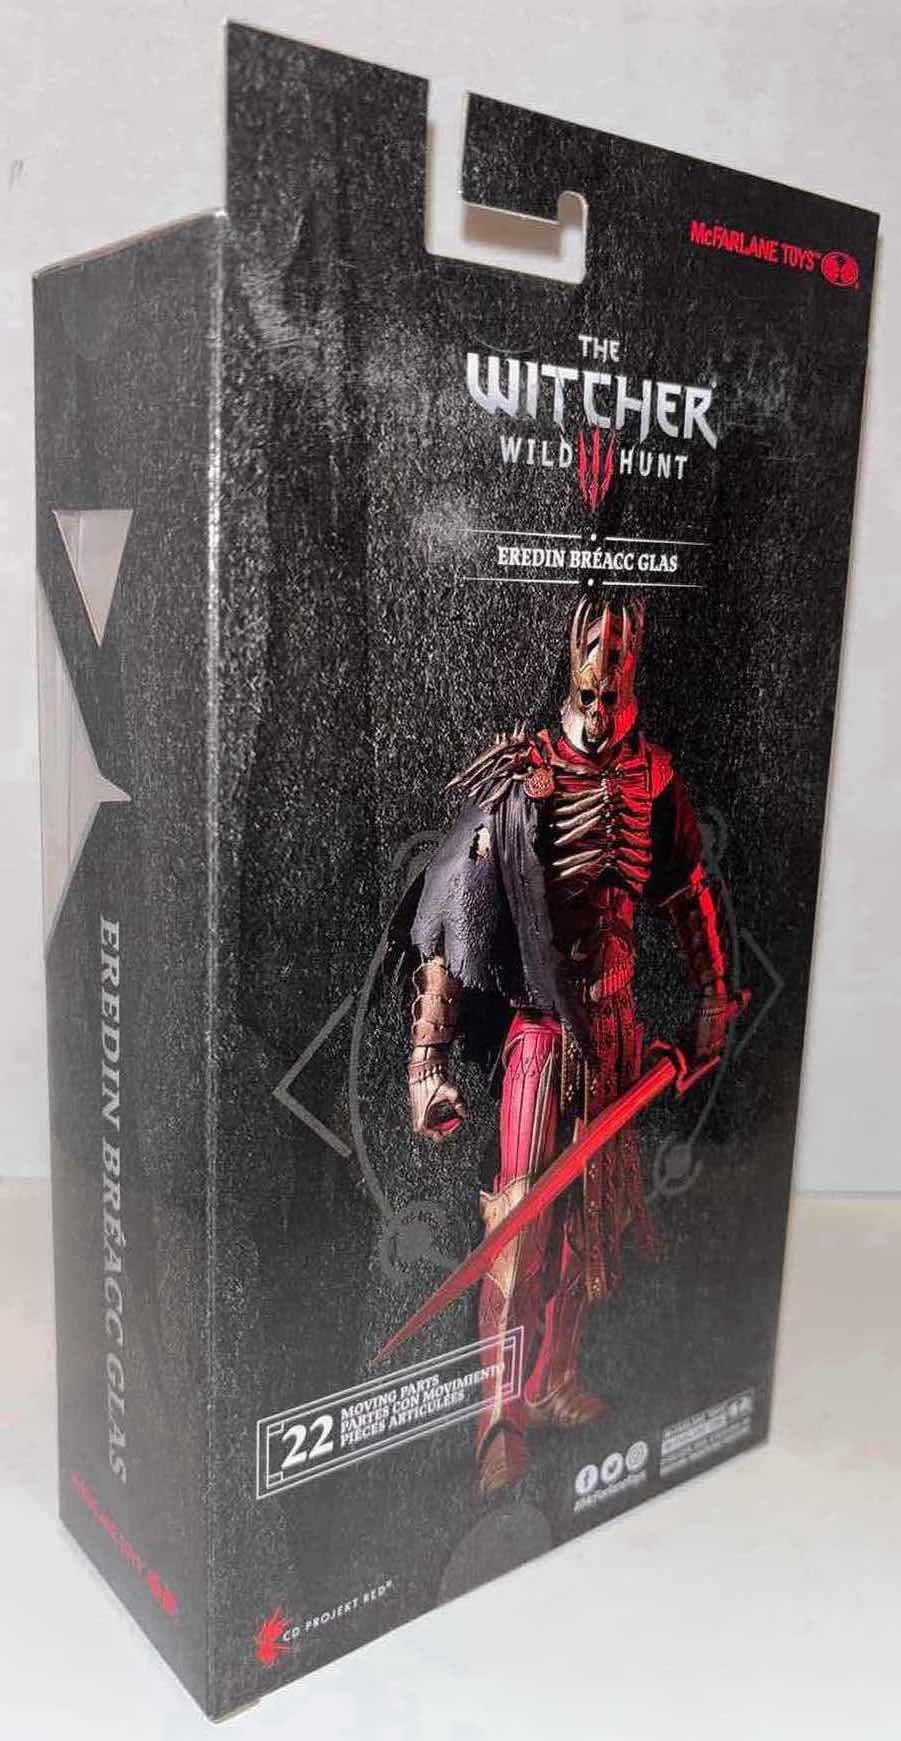 Photo 4 of NEW MCFARLANE TOYS THE WITCHER WILD HUNT 2-PACK “EREDIN BREACC GLAS” ACTION FIGURE & ACCESSORIES